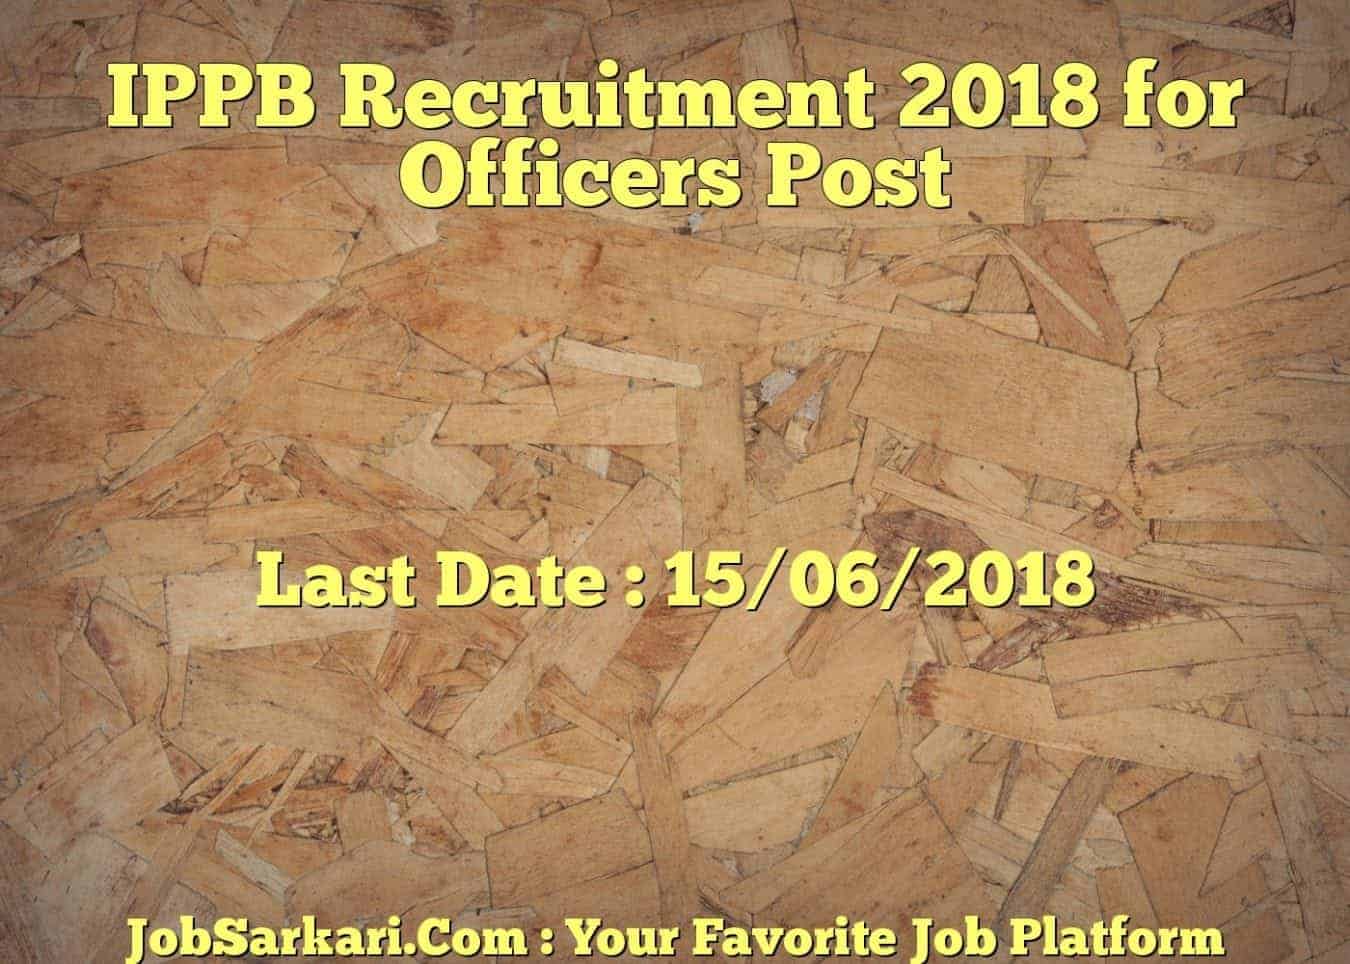 IPPB Recruitment 2018 for Officers Post